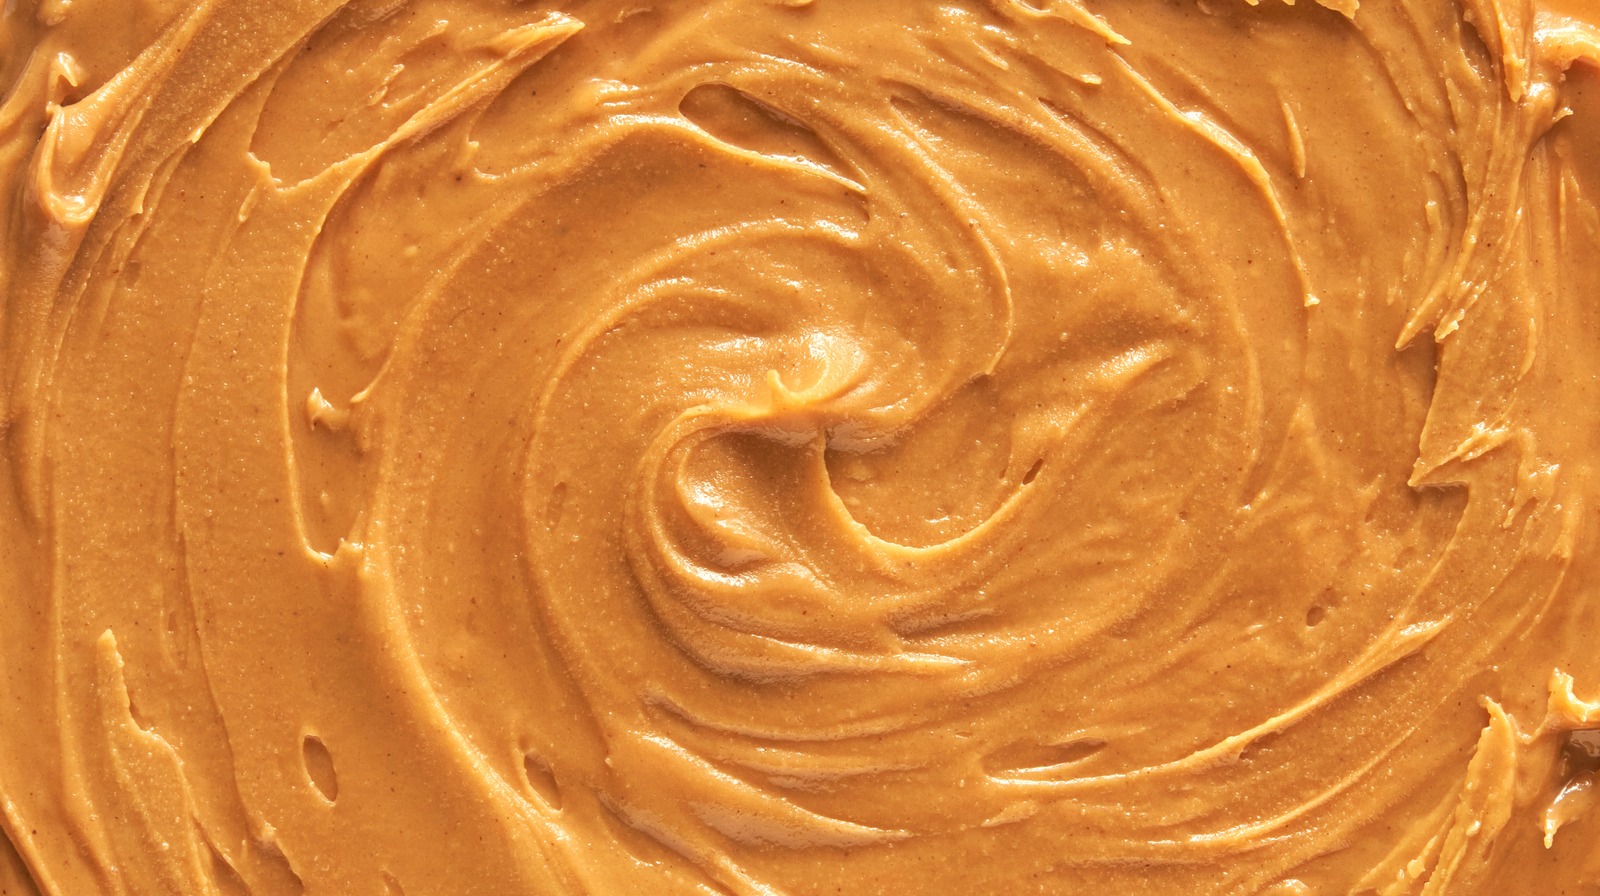 15 Facts About Peanut Butter You Should Know